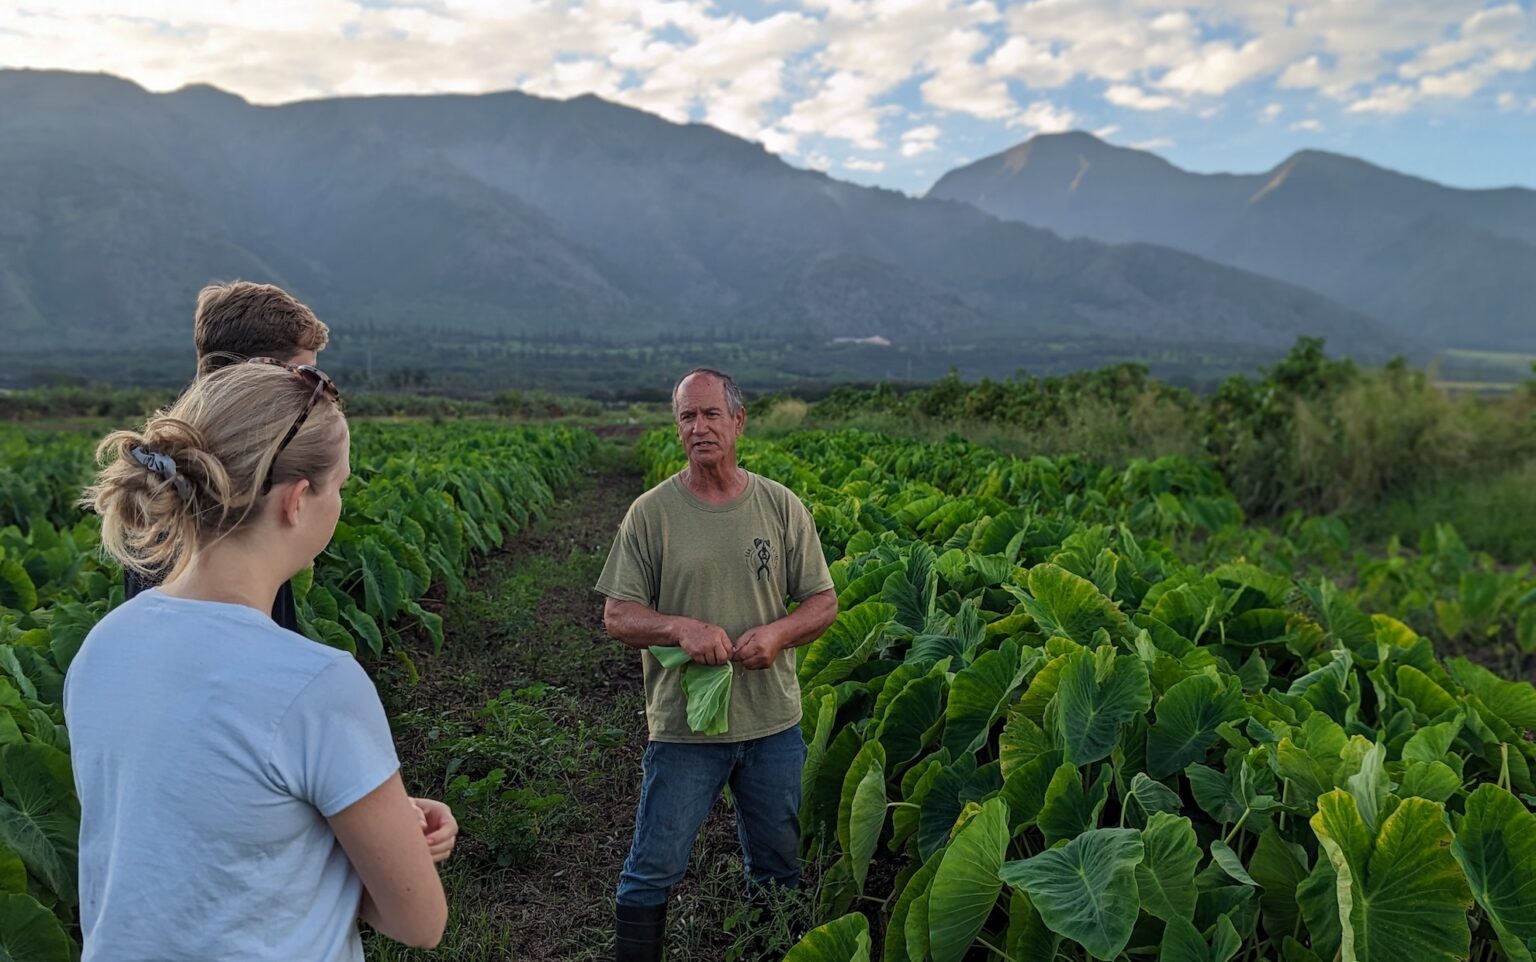 A farmer, Uncle Bobby Pahia, talks with two of the researchers while standing in his taro field, surrounded by waist-high taro plants.